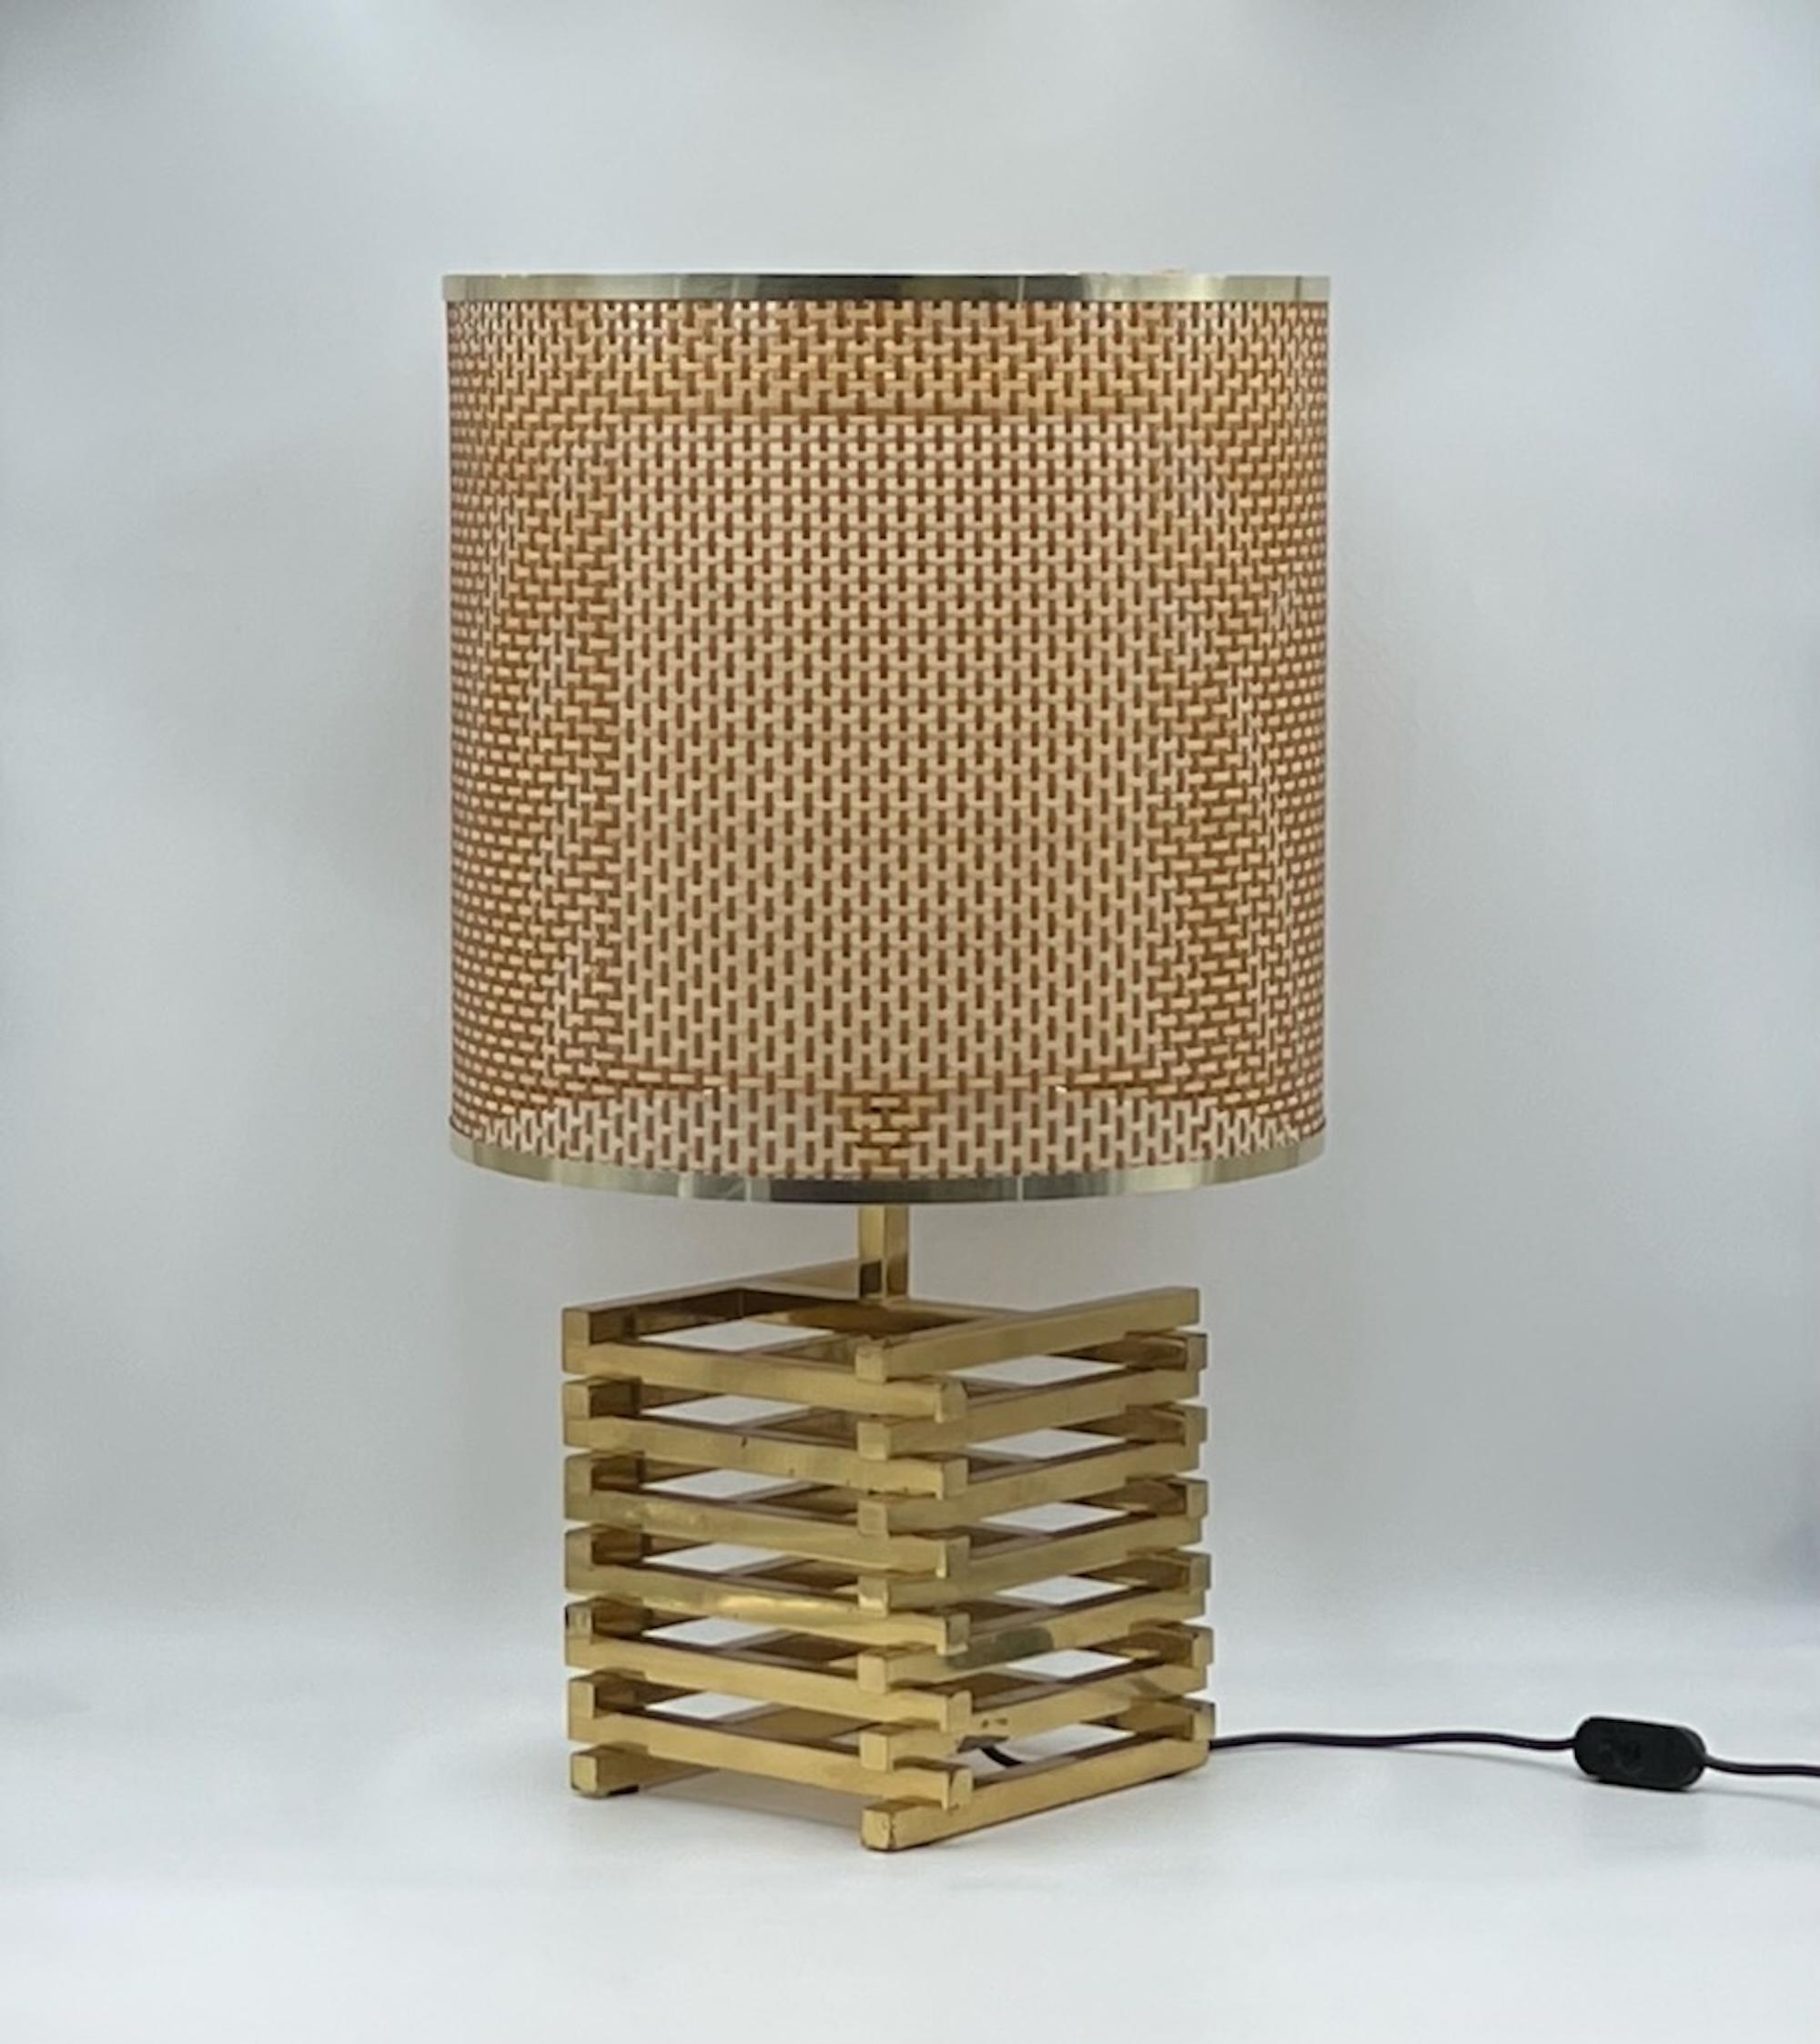 Amazing Vintage Table Lamp 'Spiga' in Heavy Brass by Enrico Tronconi, 1960s For Sale 1